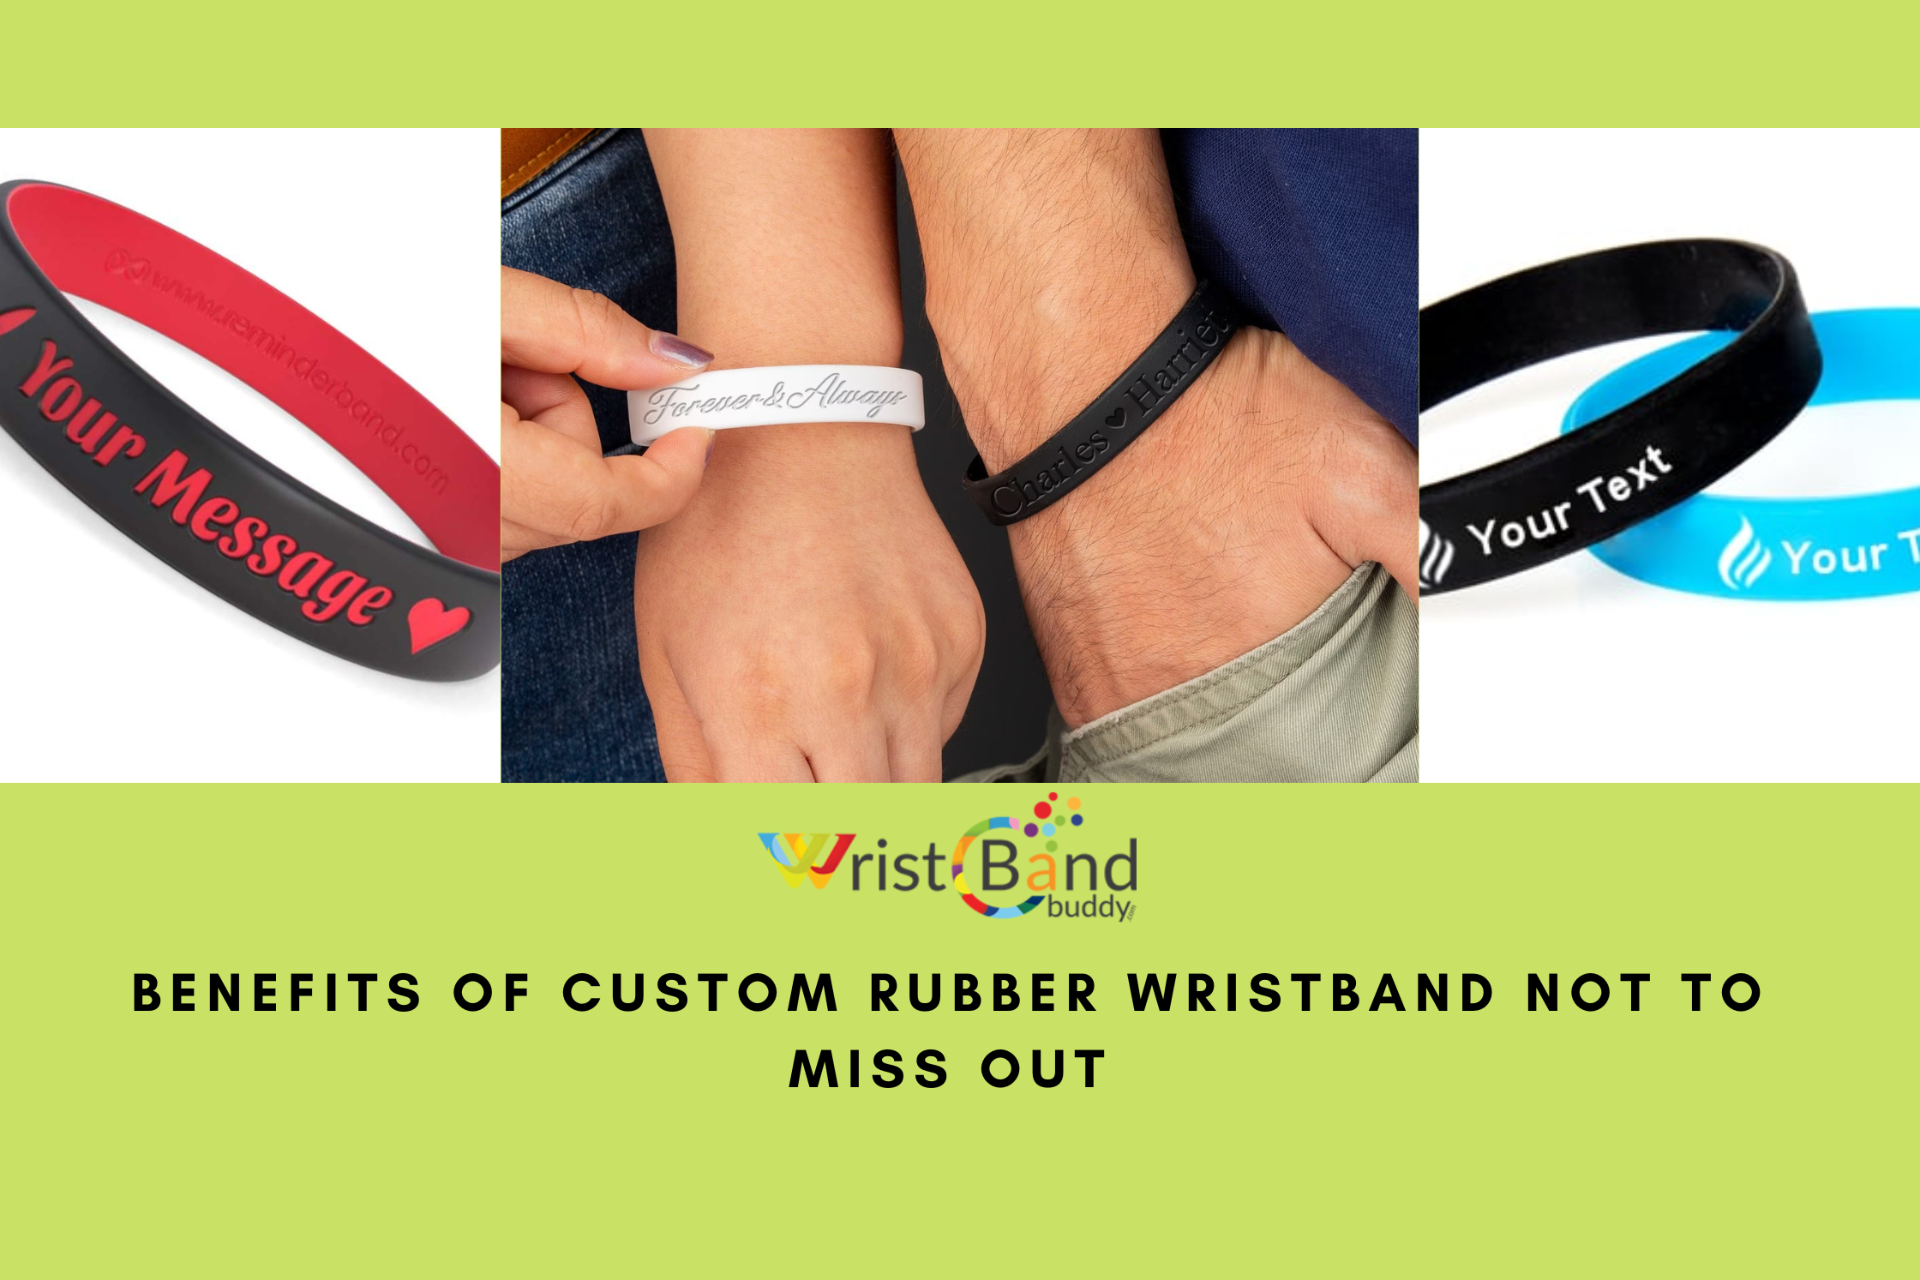 Custom Silicone Wristbands -Personalize Rubber Bracelets Events Gifts  Motivation | eBay